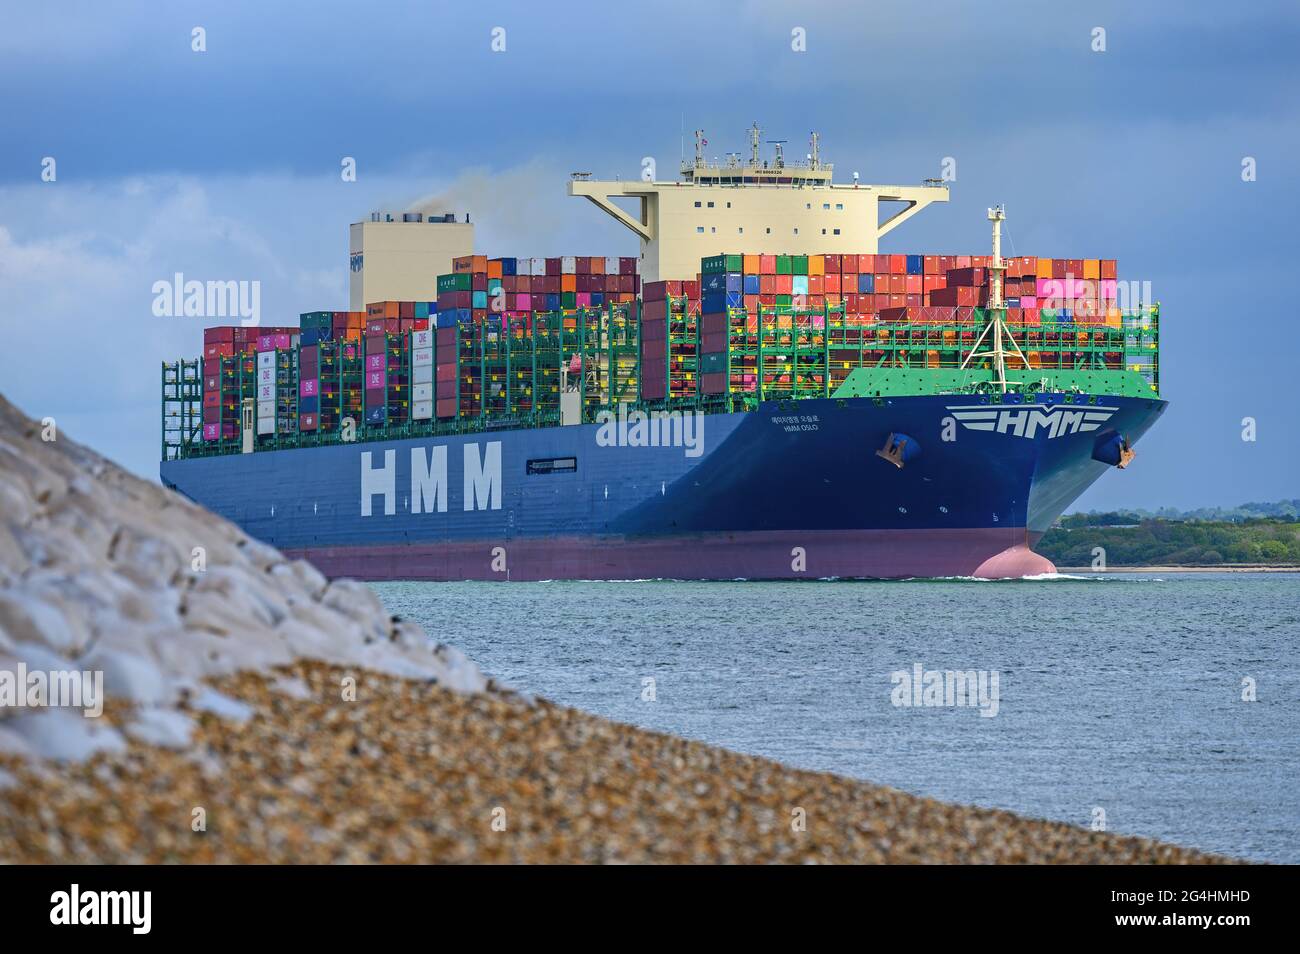 The South Korean Ultra Large container ship HMM Oslo, one of the world's largest container carriers, on Southampton Water - May 2021 Stock Photo